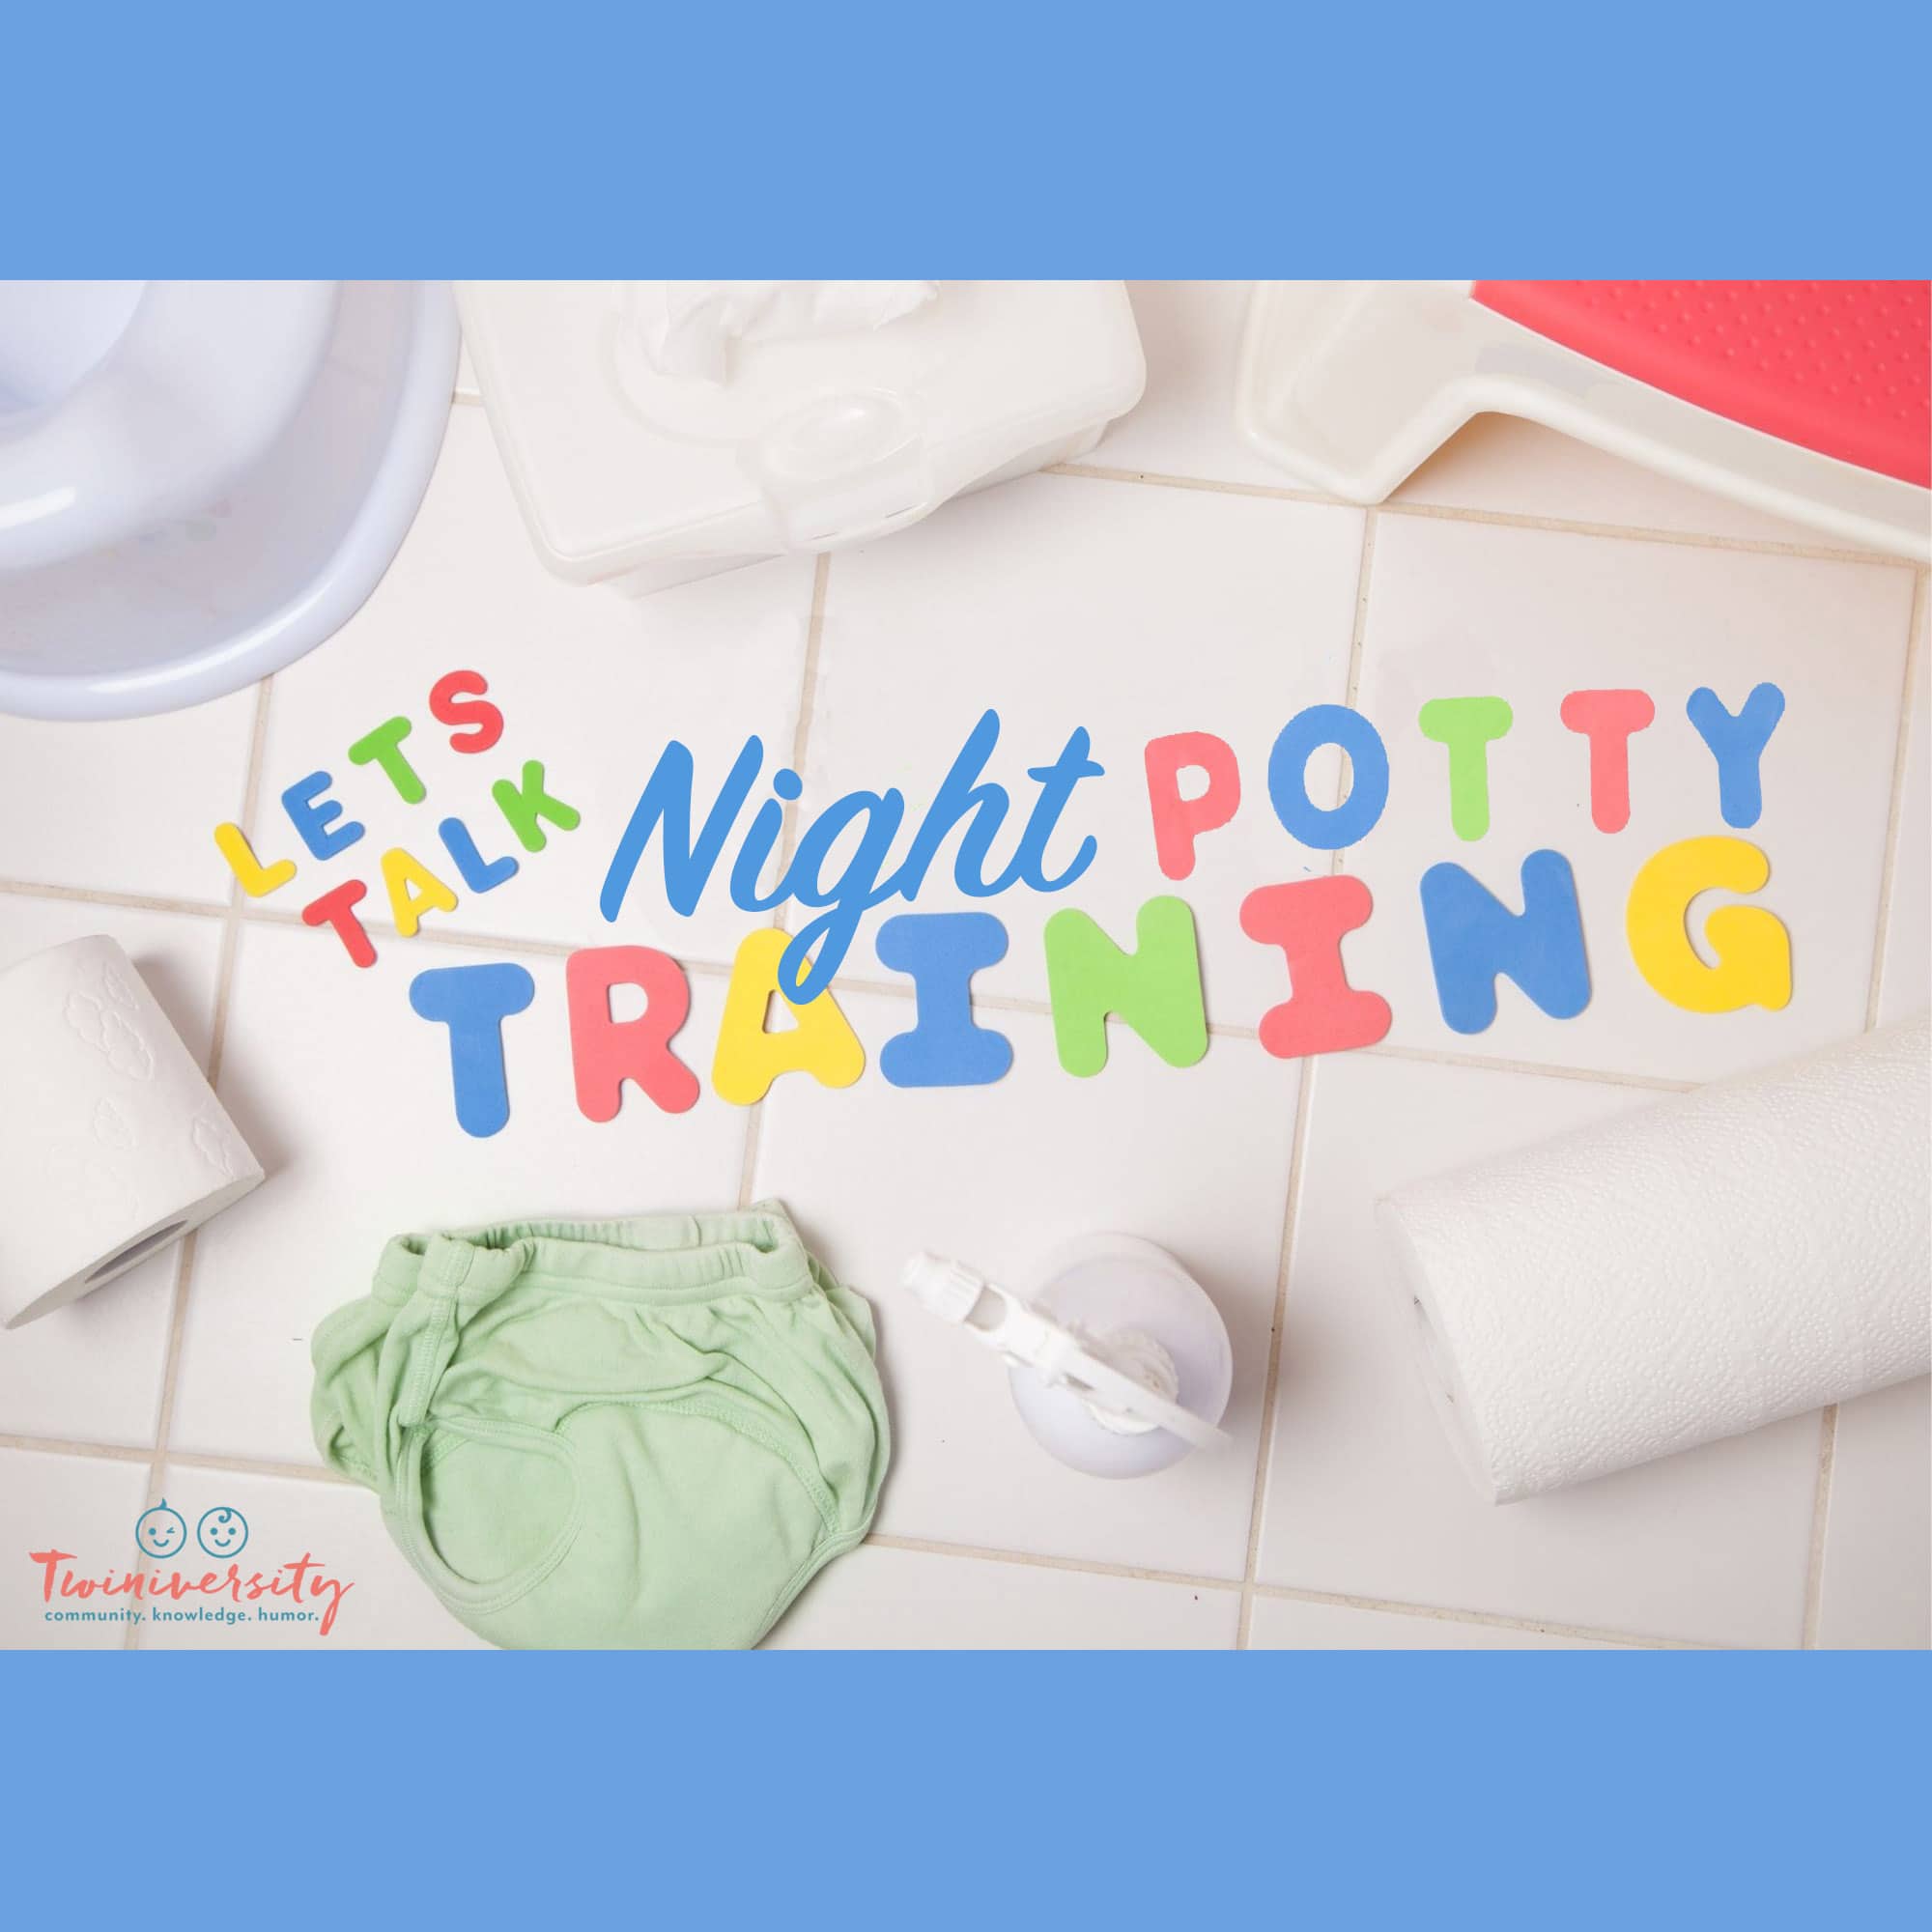 Ready For Nighttime Potty Training?  Child Sleep Consultant, New Hampshire